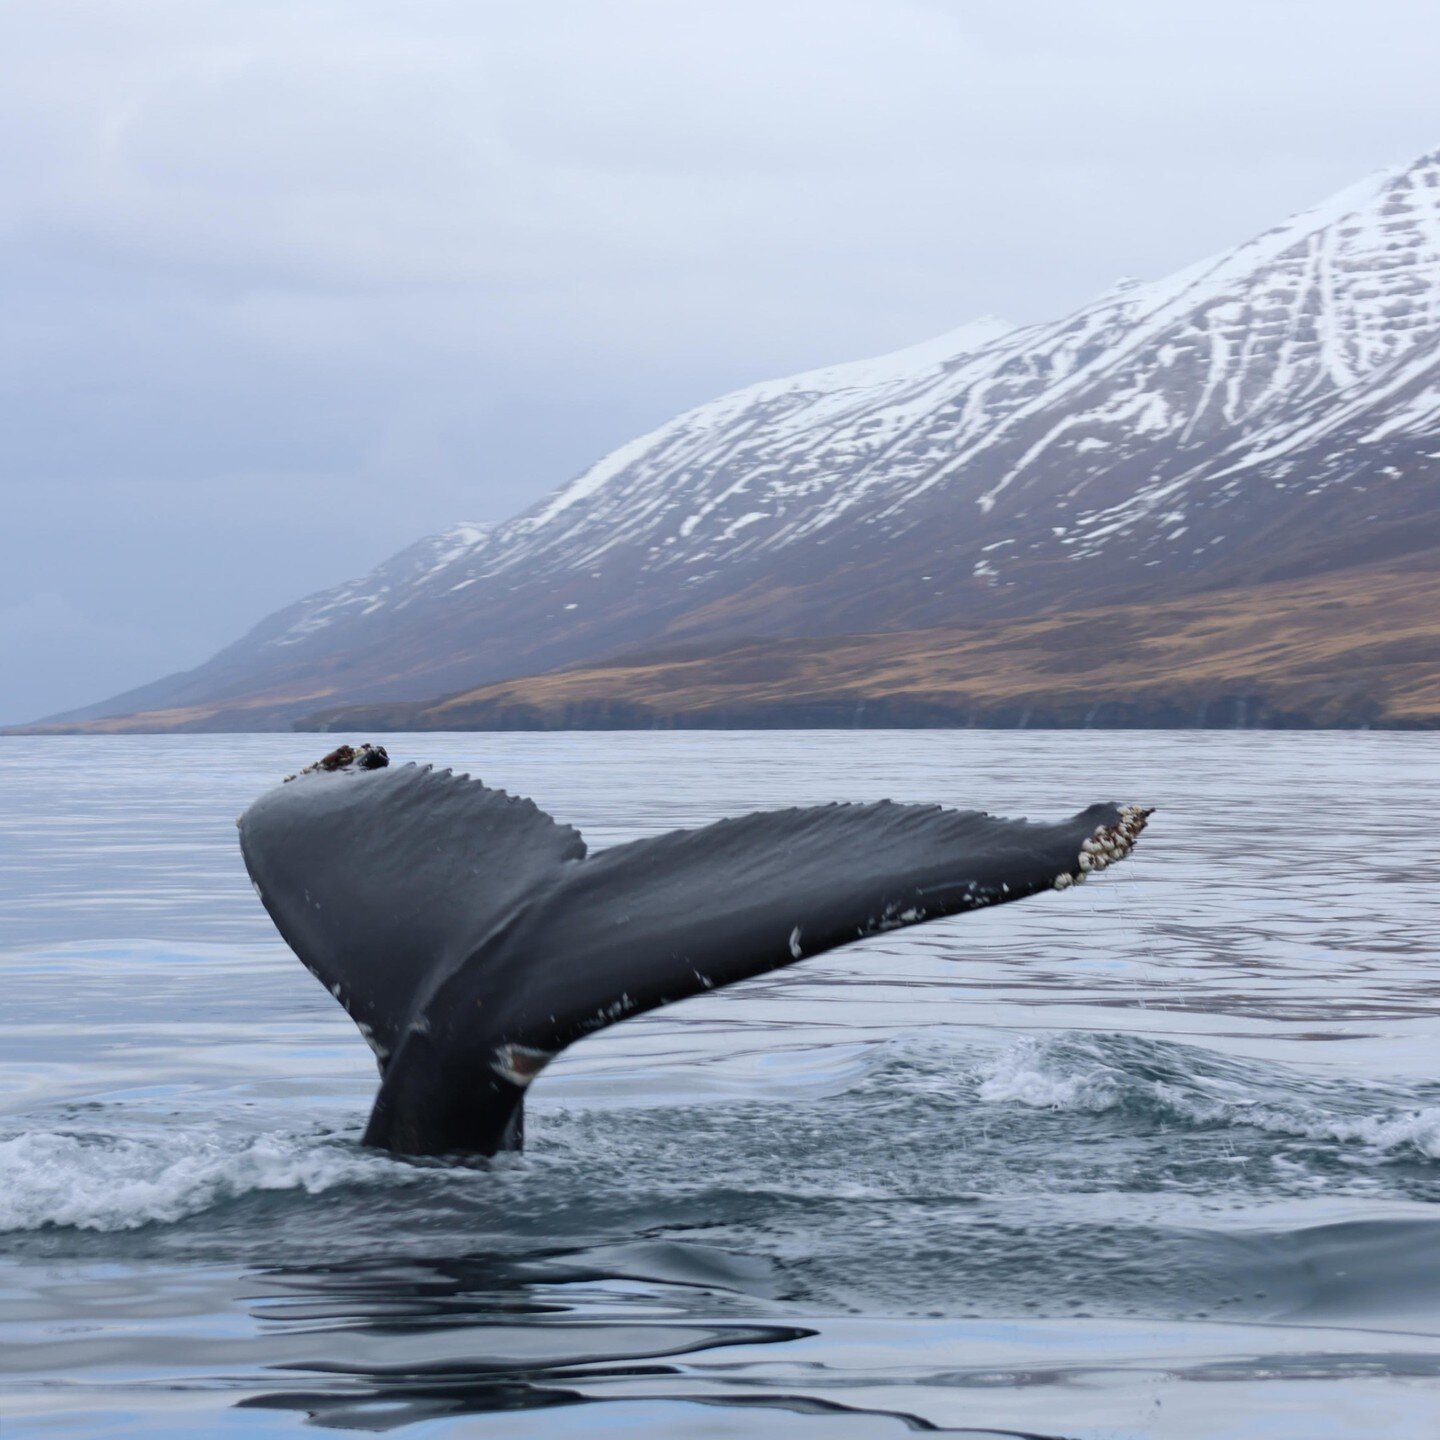 Have you ever wondered what would it be like to communicate with a whale? This winter a research team in Alaska made a groundbreaking achievement by having a 20min &quot;conversation&quot; with a Humpback whale. In response to a recorded humpback &ls